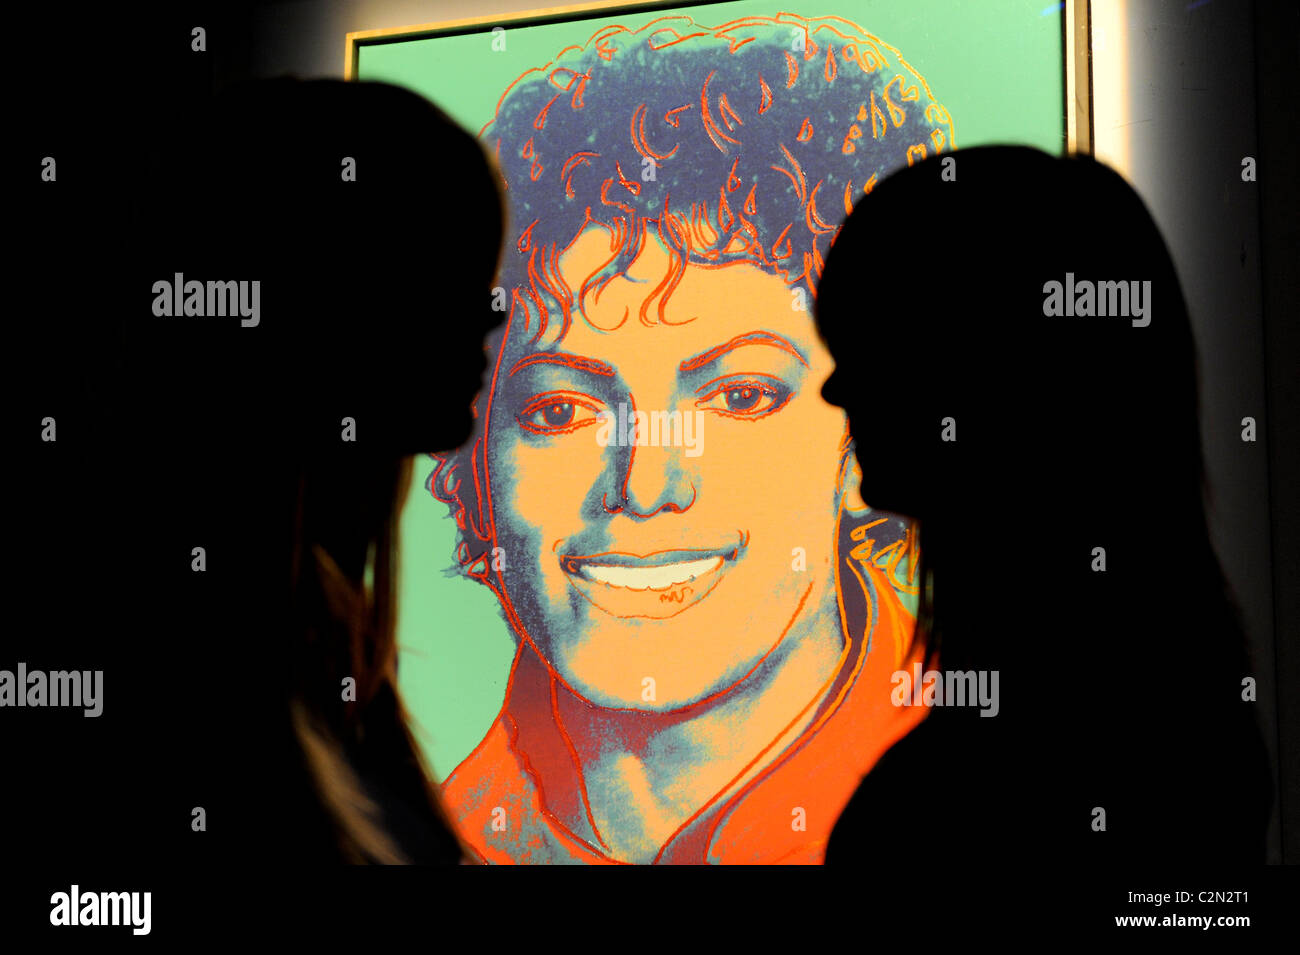 Andy Warhol's 'Michael Jackson' portrait, expected to fetch up to $10 million at a Christies auction in New York. Stock Photo